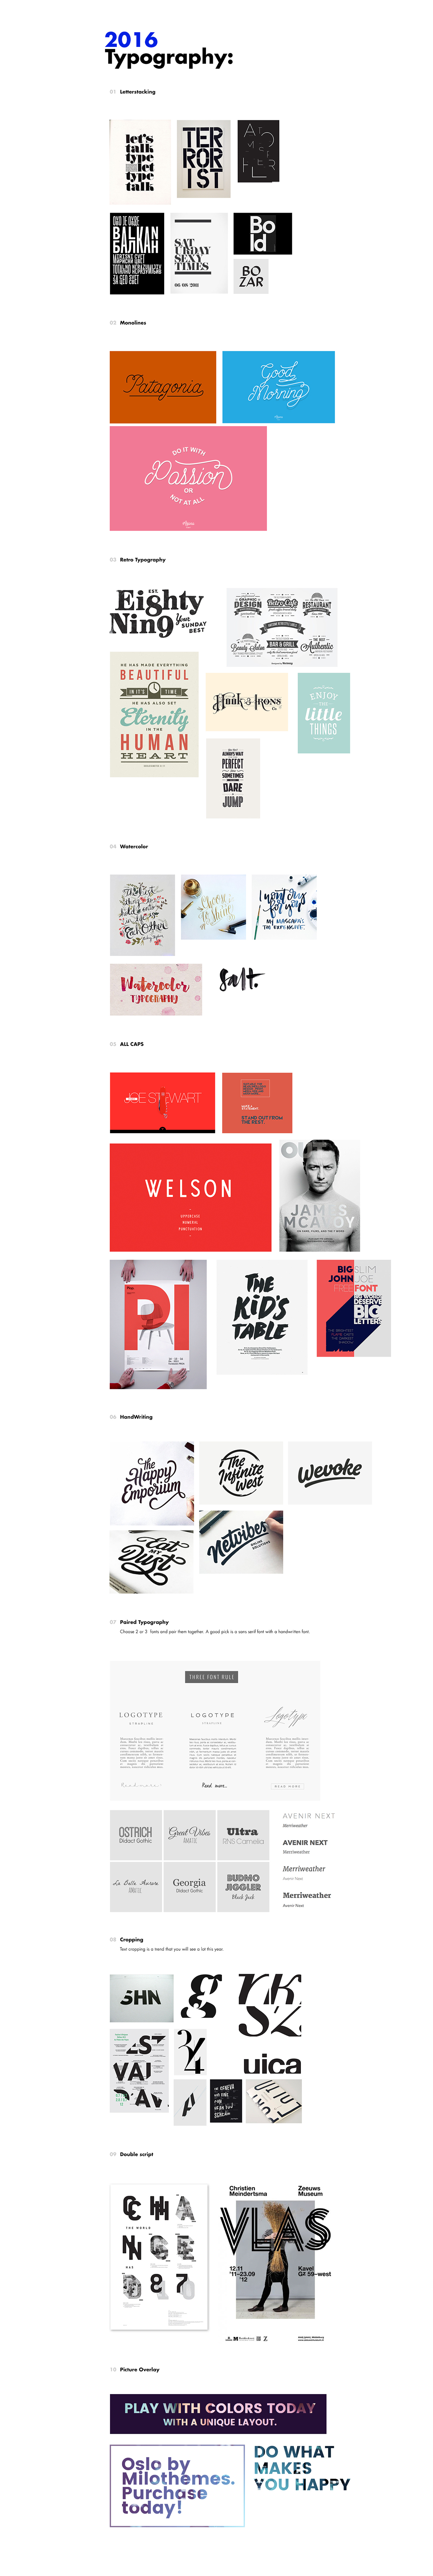 design trends 2016 guide flat material typography parallax colors pantone